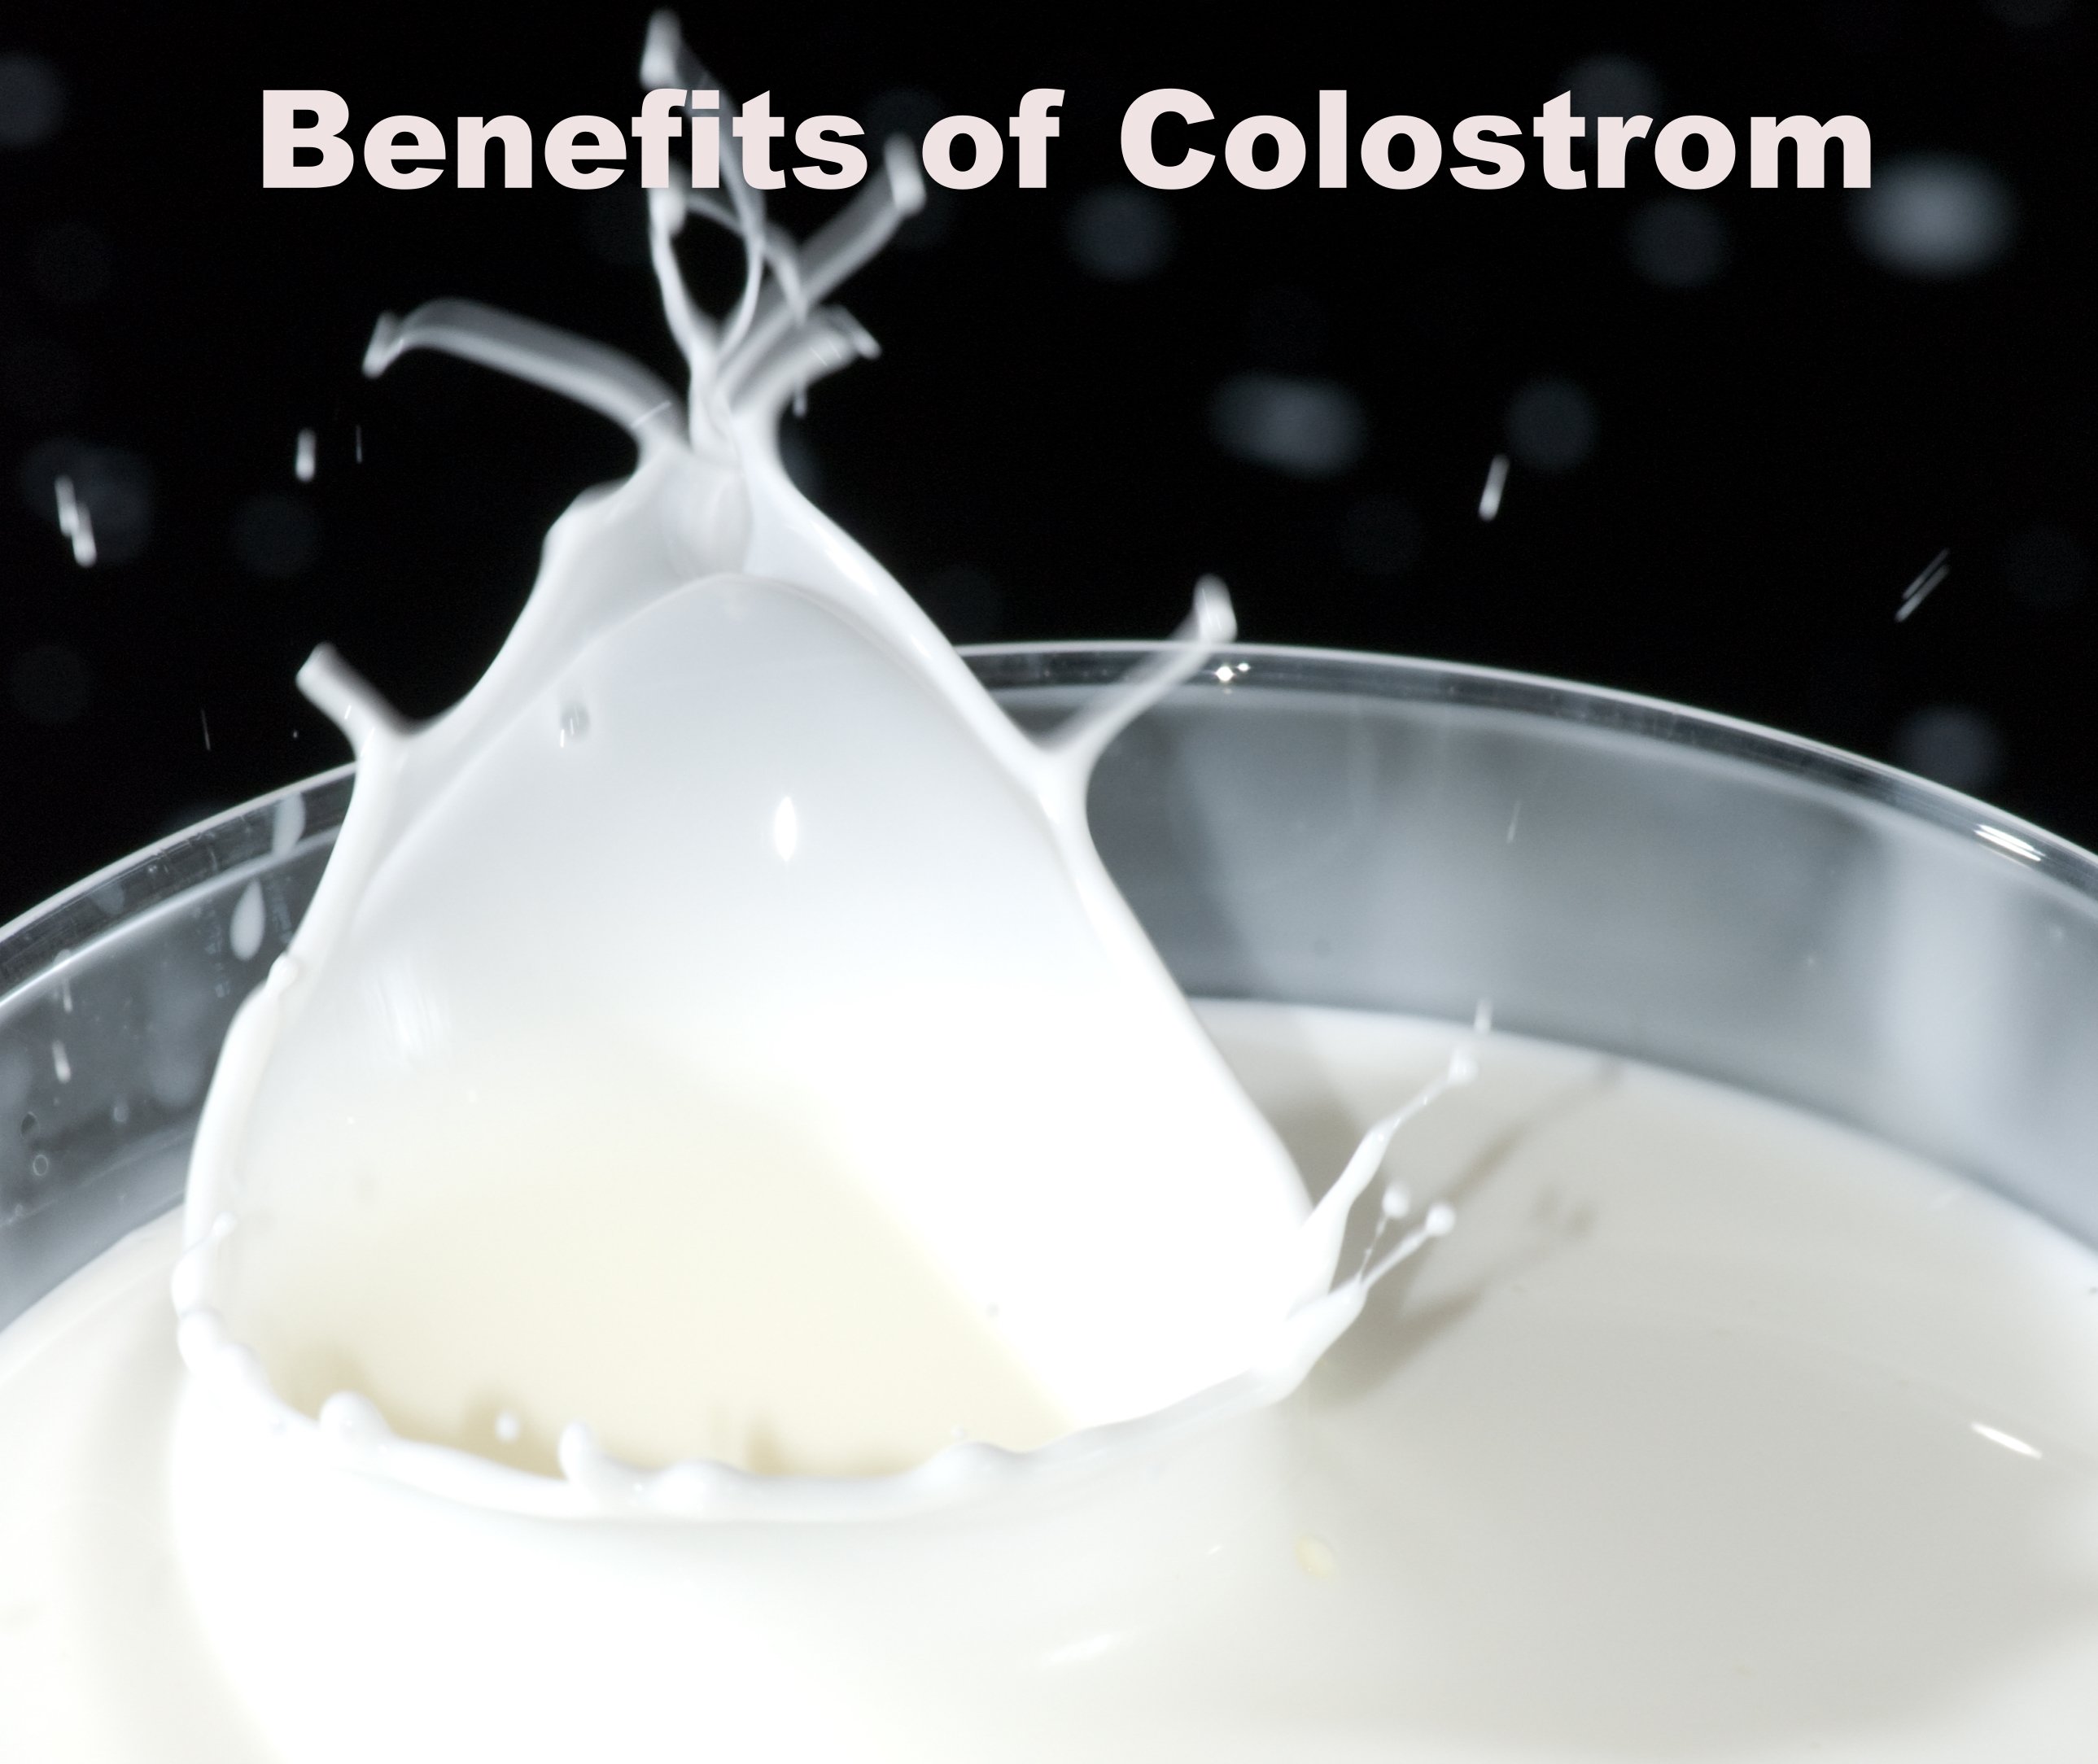 The Health Benefits of Colostrum